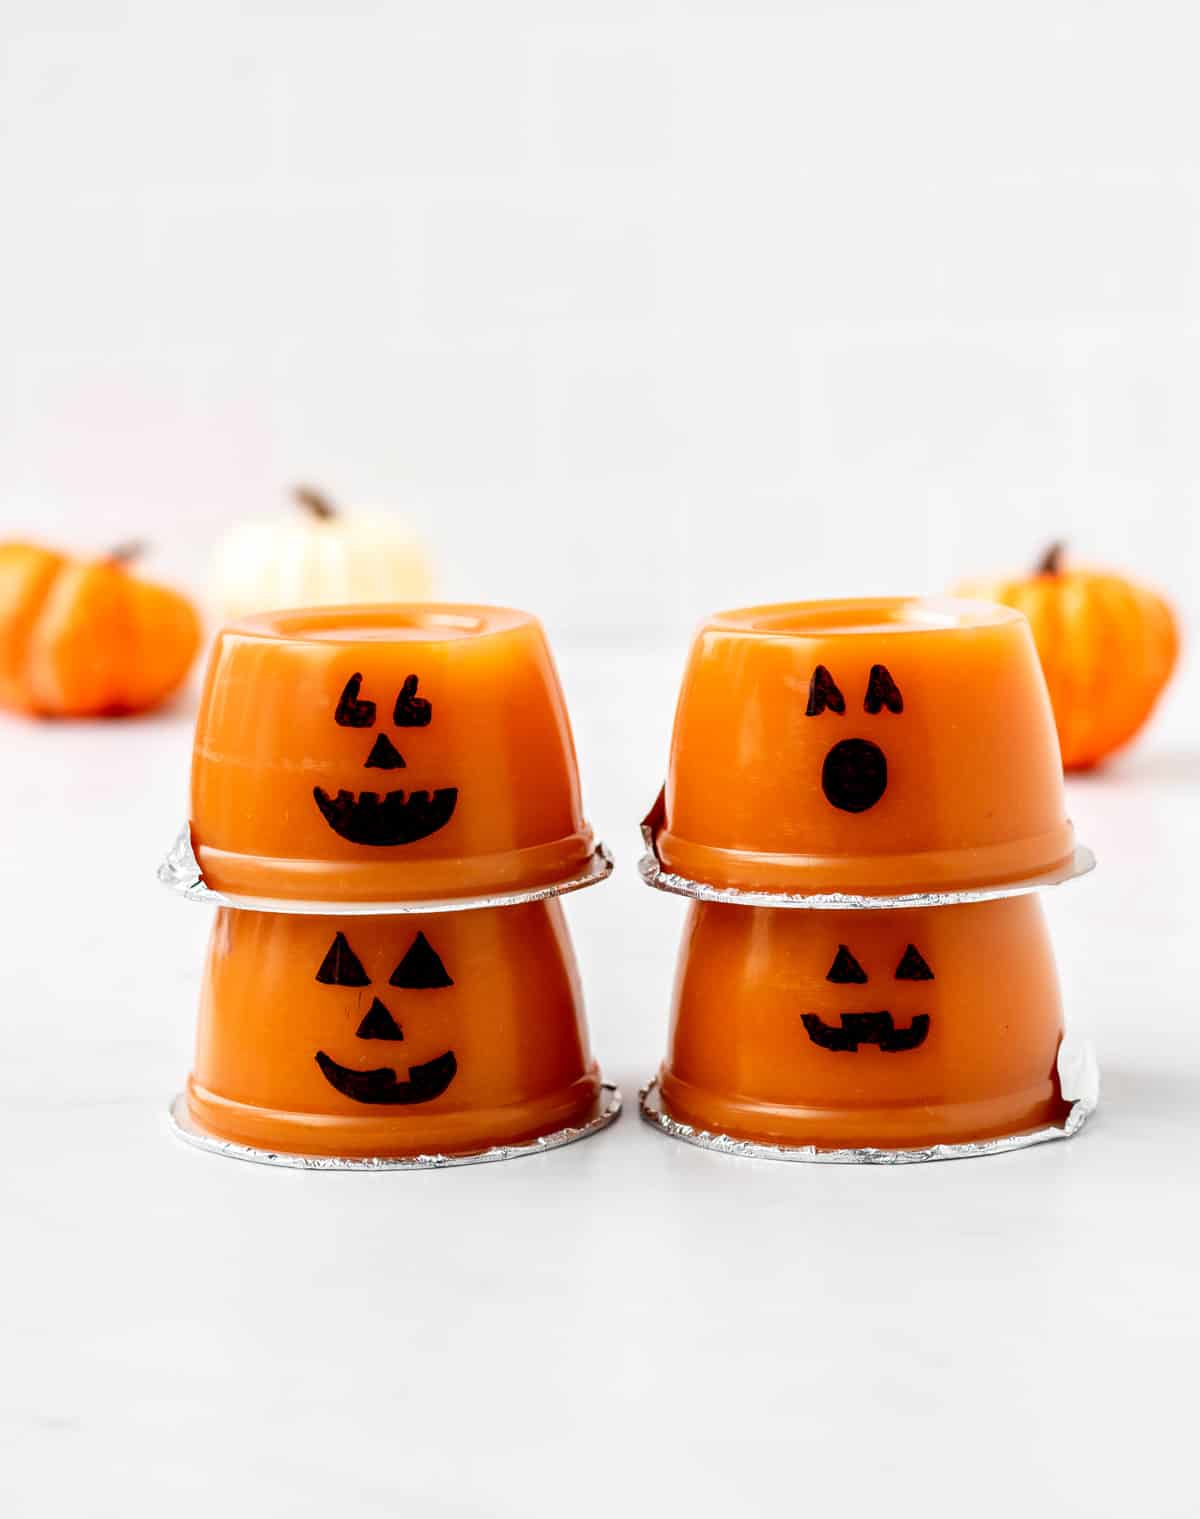 Four jack o lantern applesauce cups stacked on top of each other.